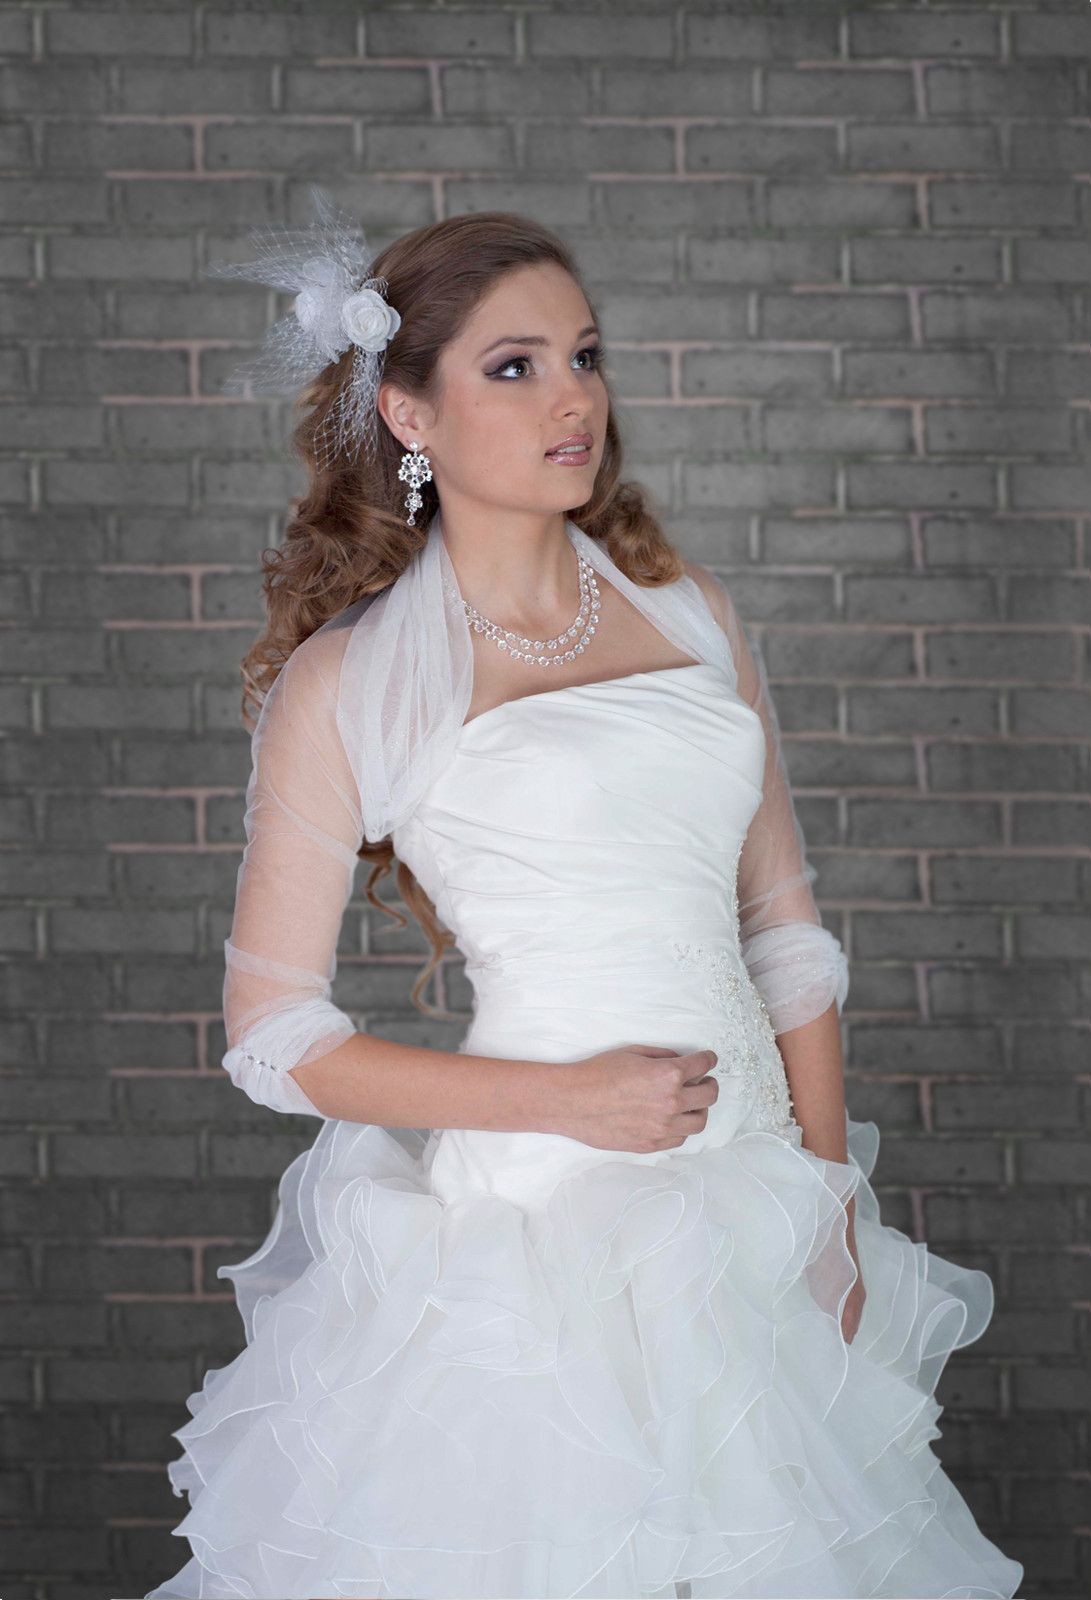 Details about   Women's Bridal Wedding White or Ivory Bolero Jacket Tulle with Lace Applique 